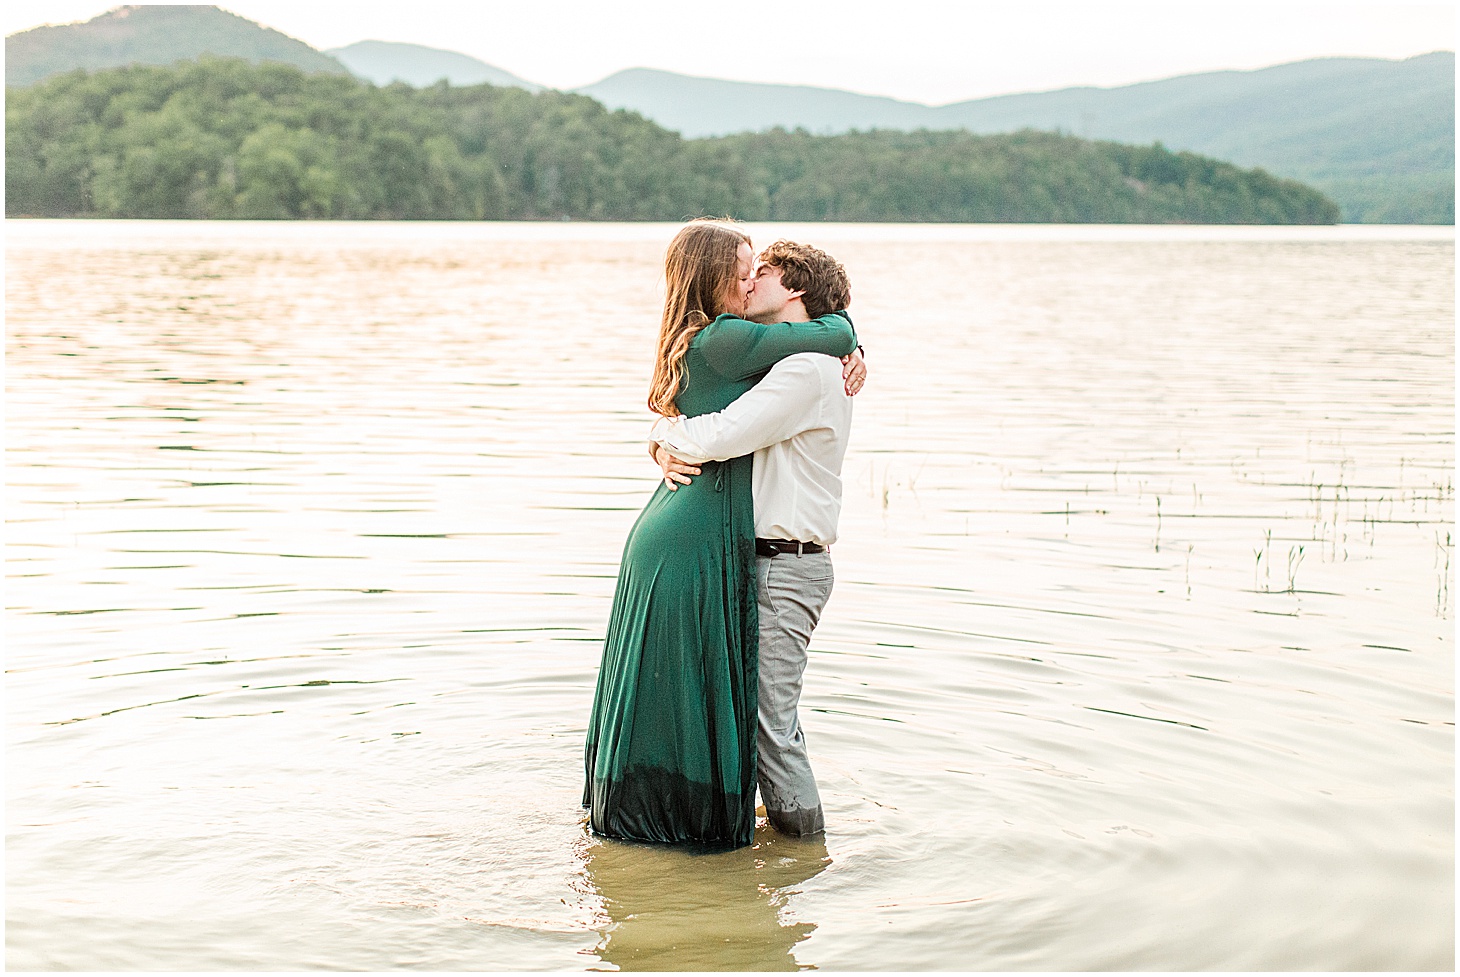 carvinscoveengagementsession_roanokeengagementsession_carvinscove_virginiawedding_virginiaweddingphotographer_vaweddingphotographer_photo_0078.jpg